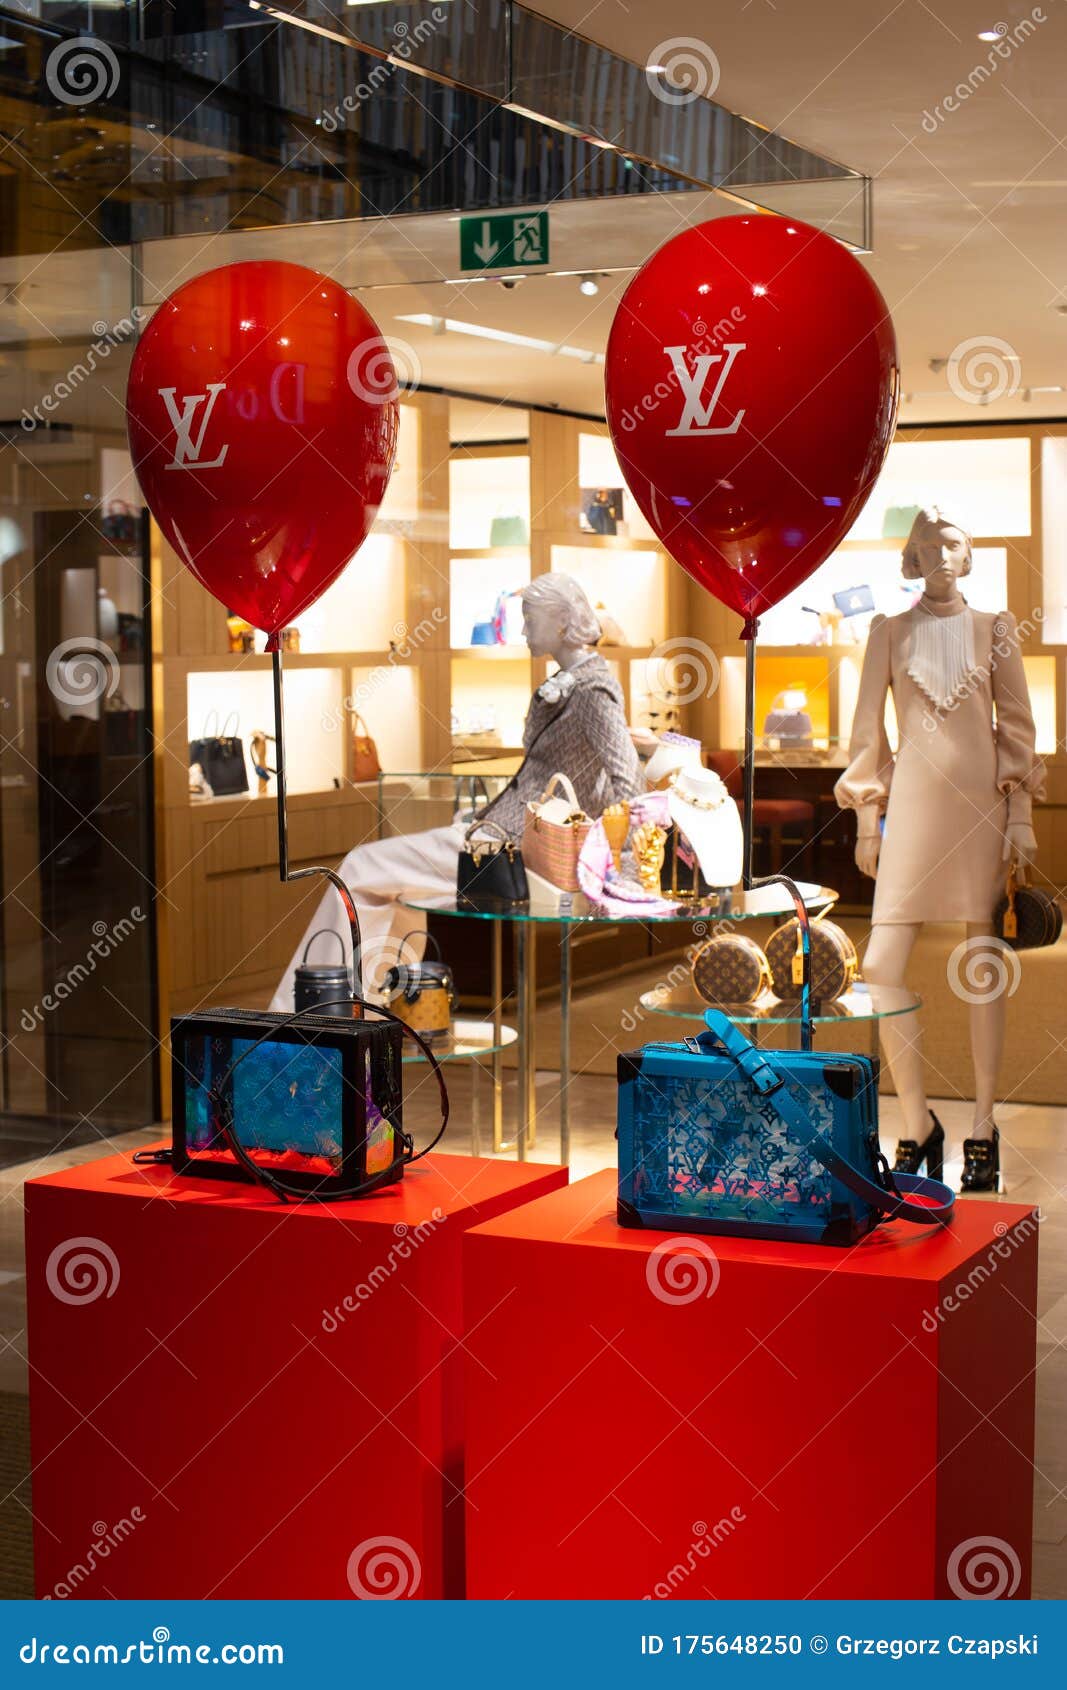 LV Louis Vuitton Fashion Store, Window Shop, Bags, Clothes And Shoes On Display For Sale, Modern ...